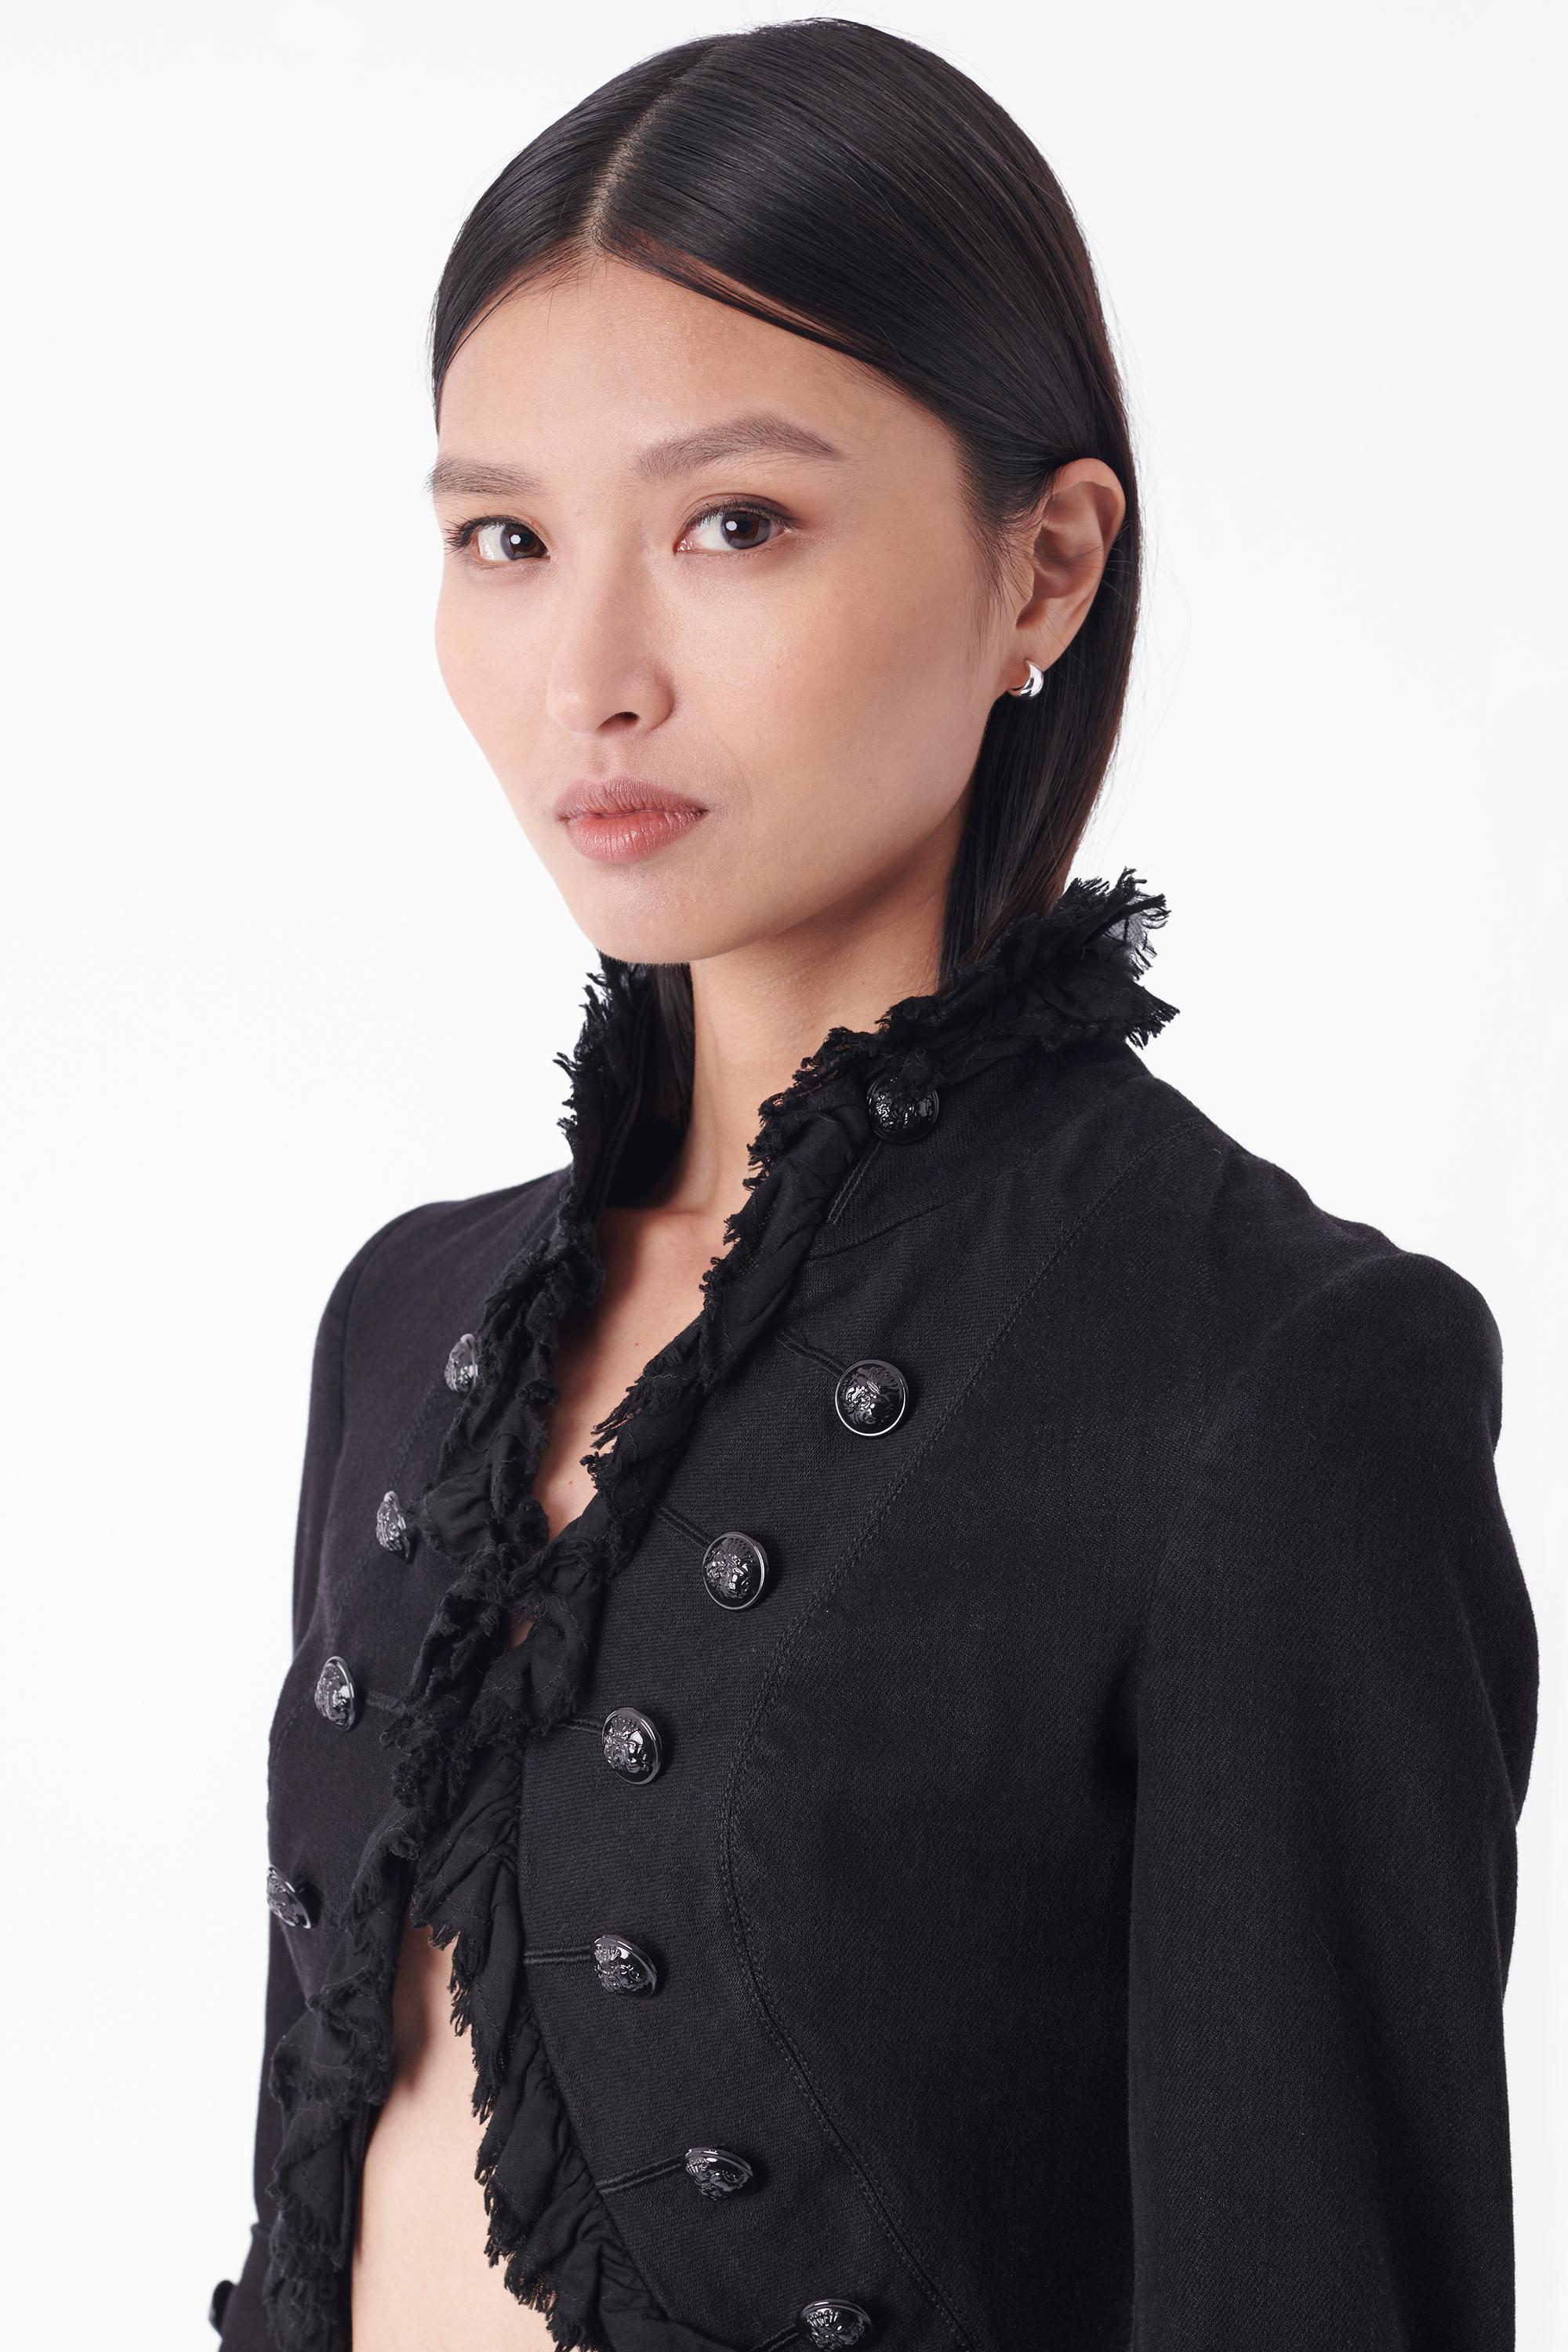 We are excited to present this Alexander McQueen Fall Winter 2008 black British-colonial style jacket. Features distressed ruffle along the neckline, black buttons along the front of the jacket with inner hook & eye closure, pleats style back and